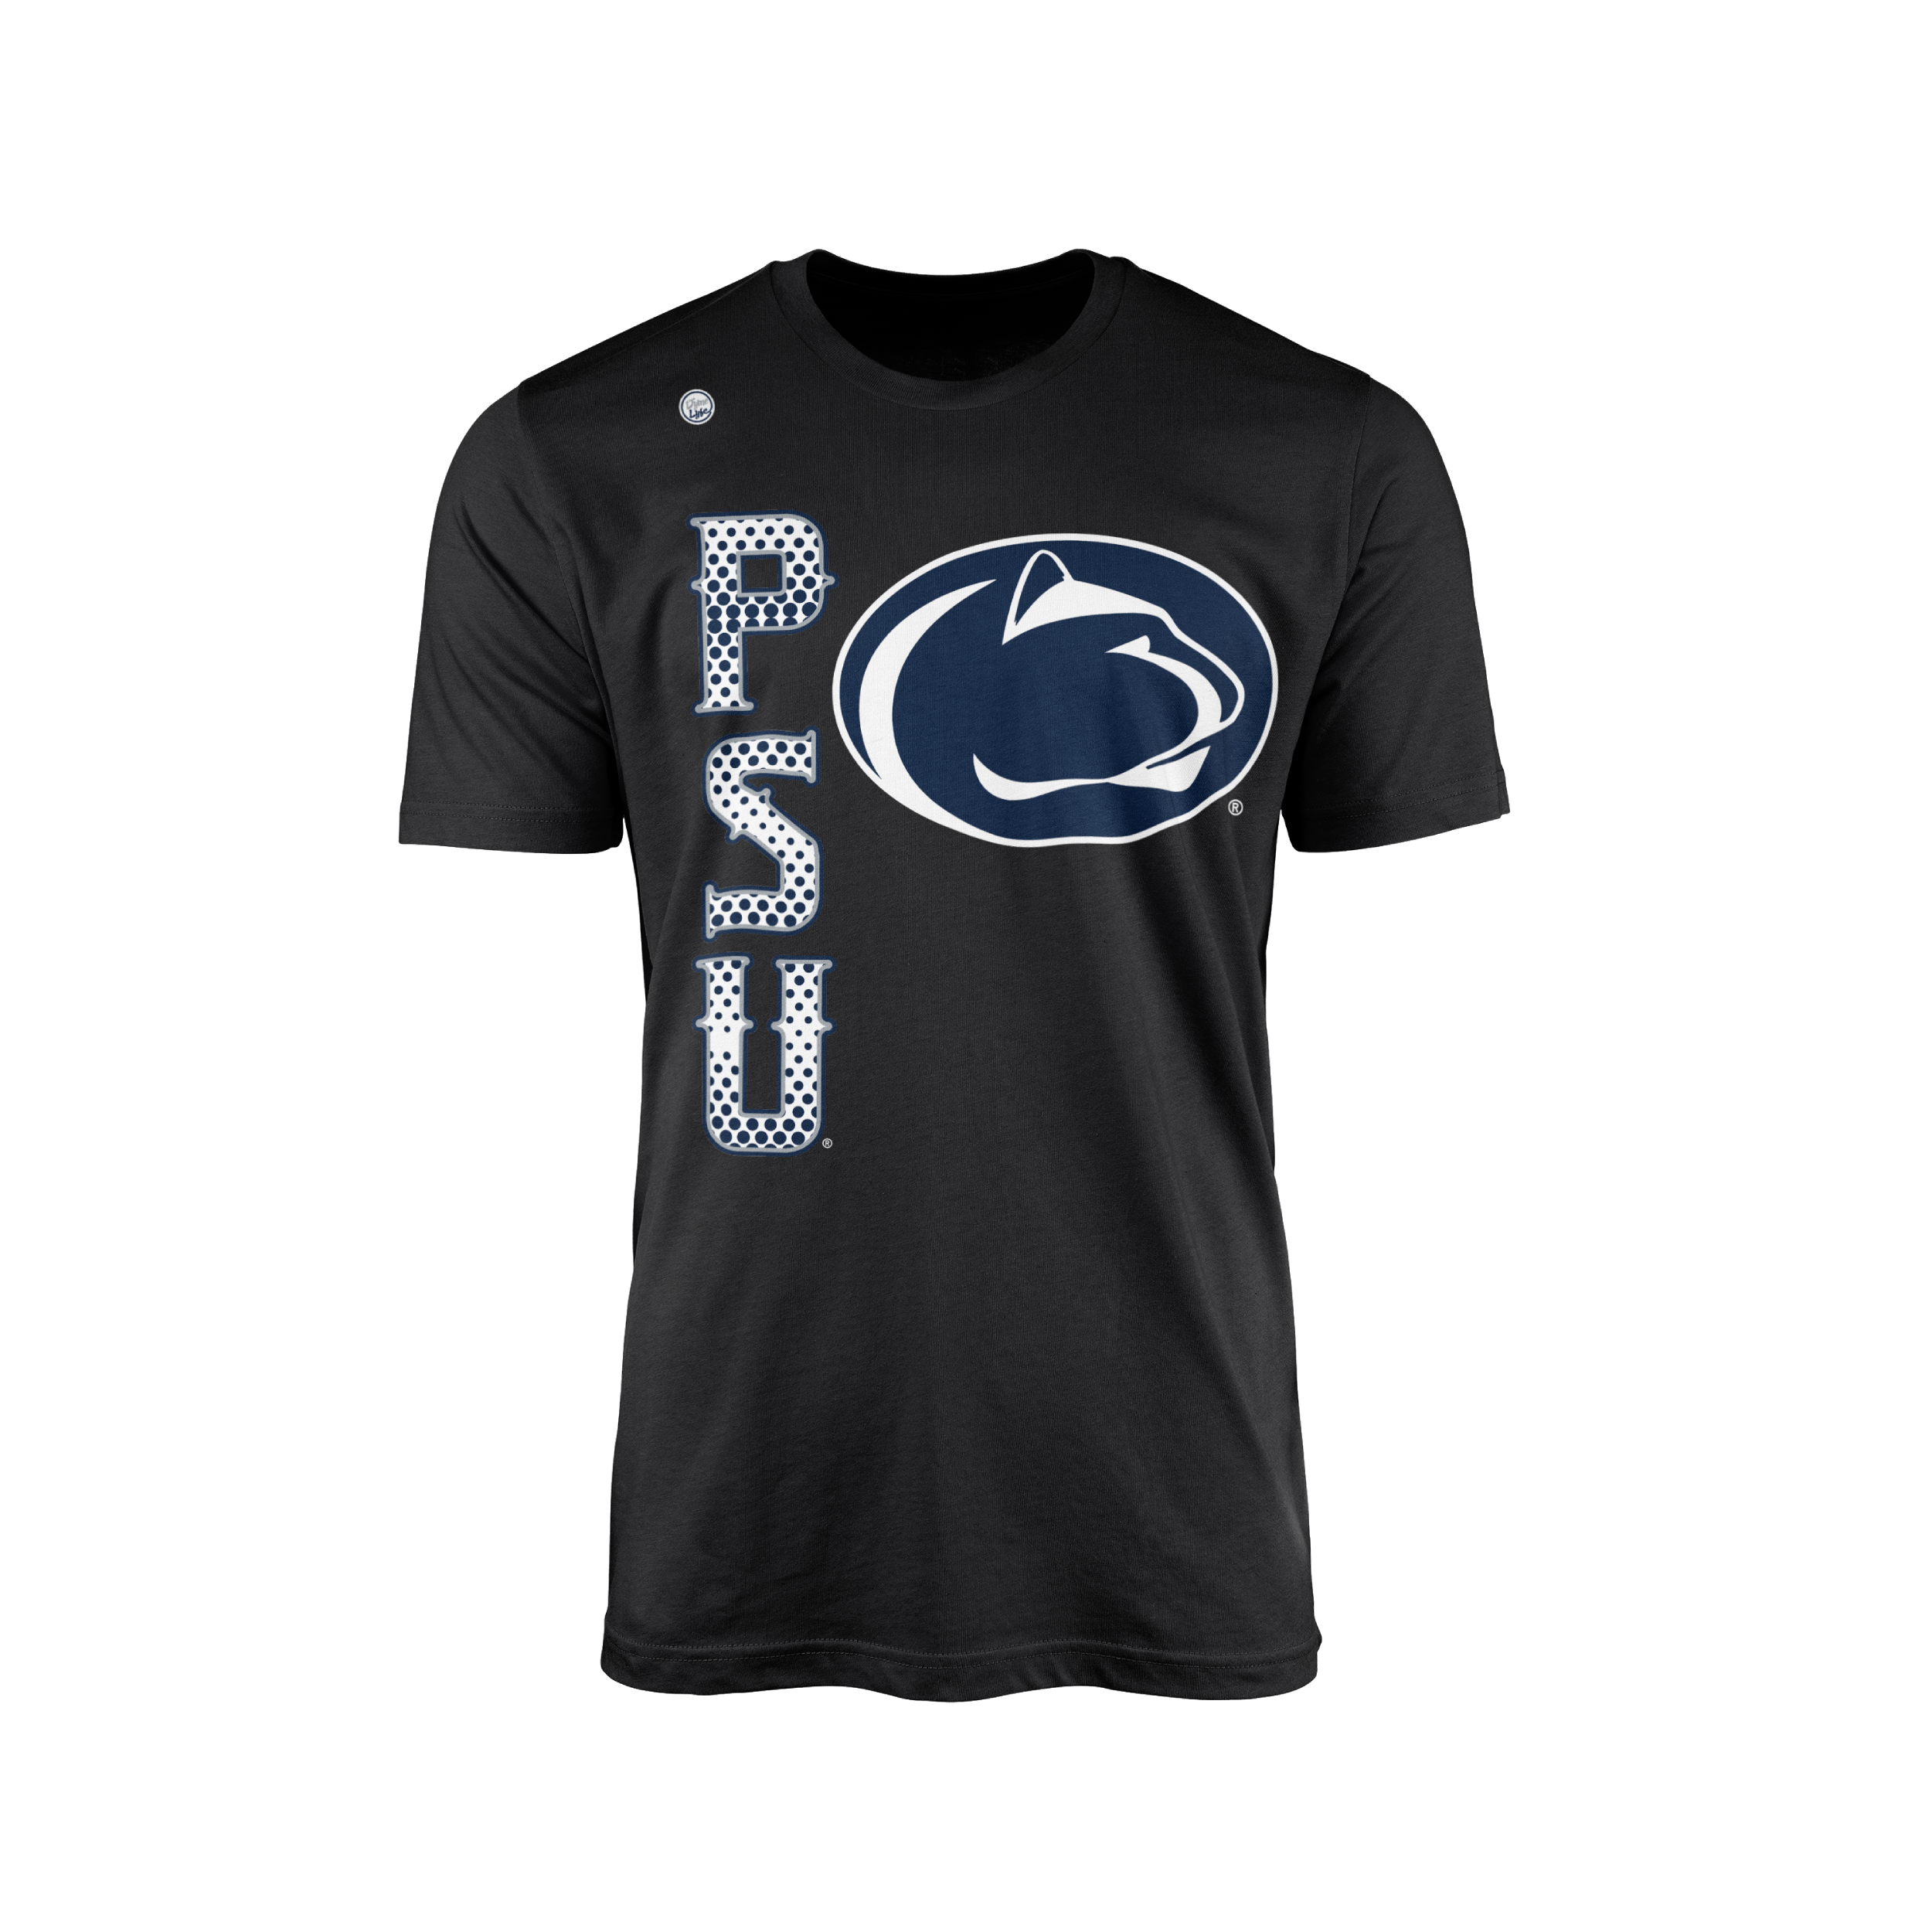 Penn State Nittany Lions Men’s Ace Tee